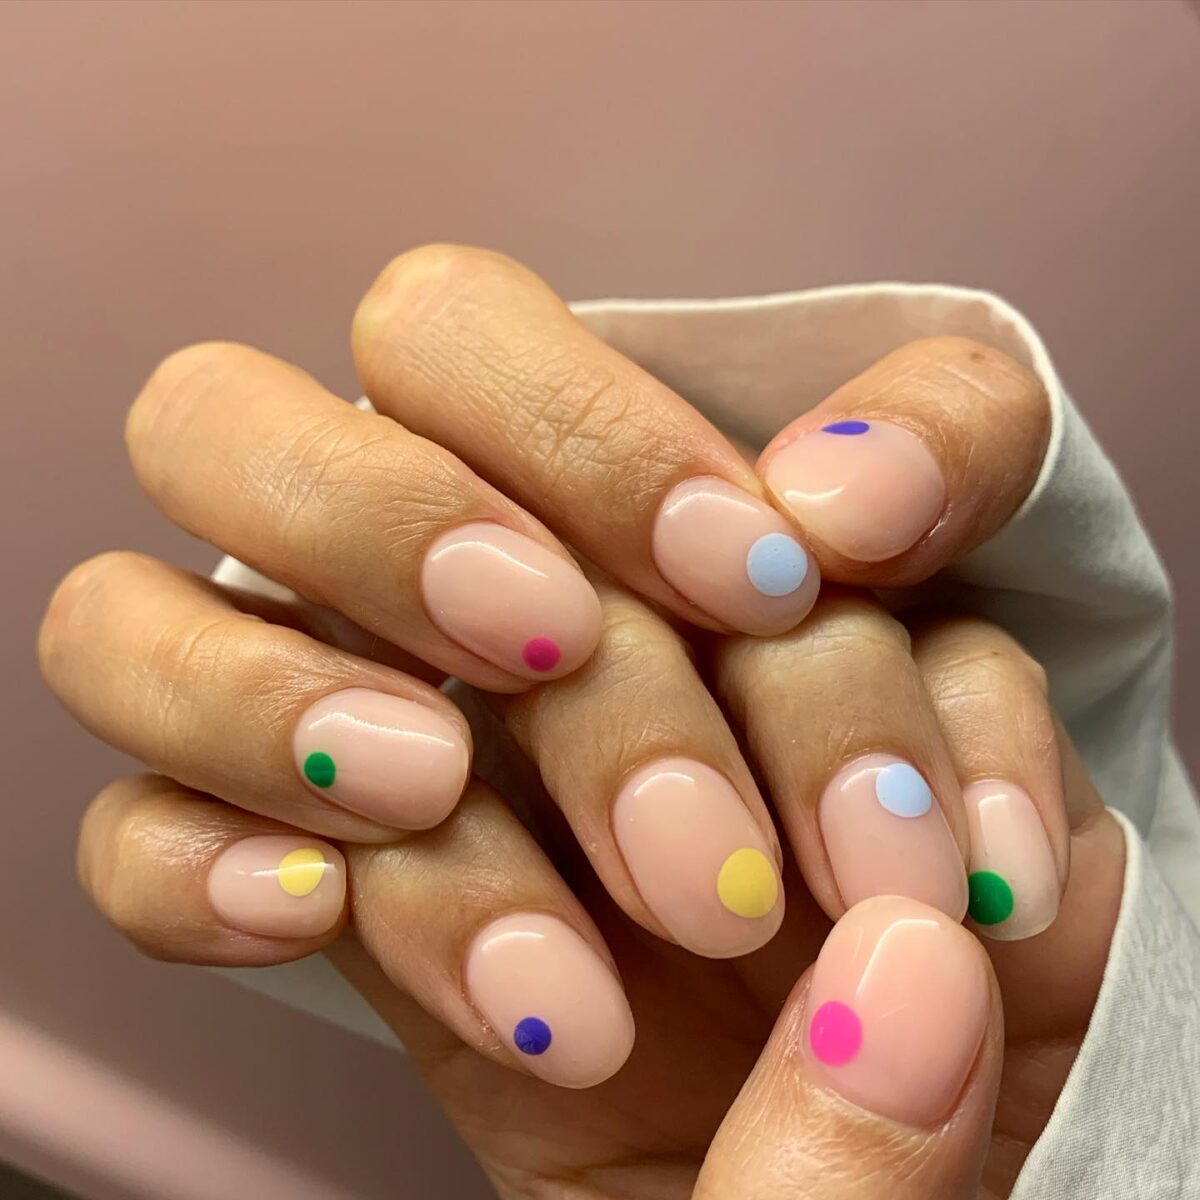 Nude nails with a single colored dot on each nail